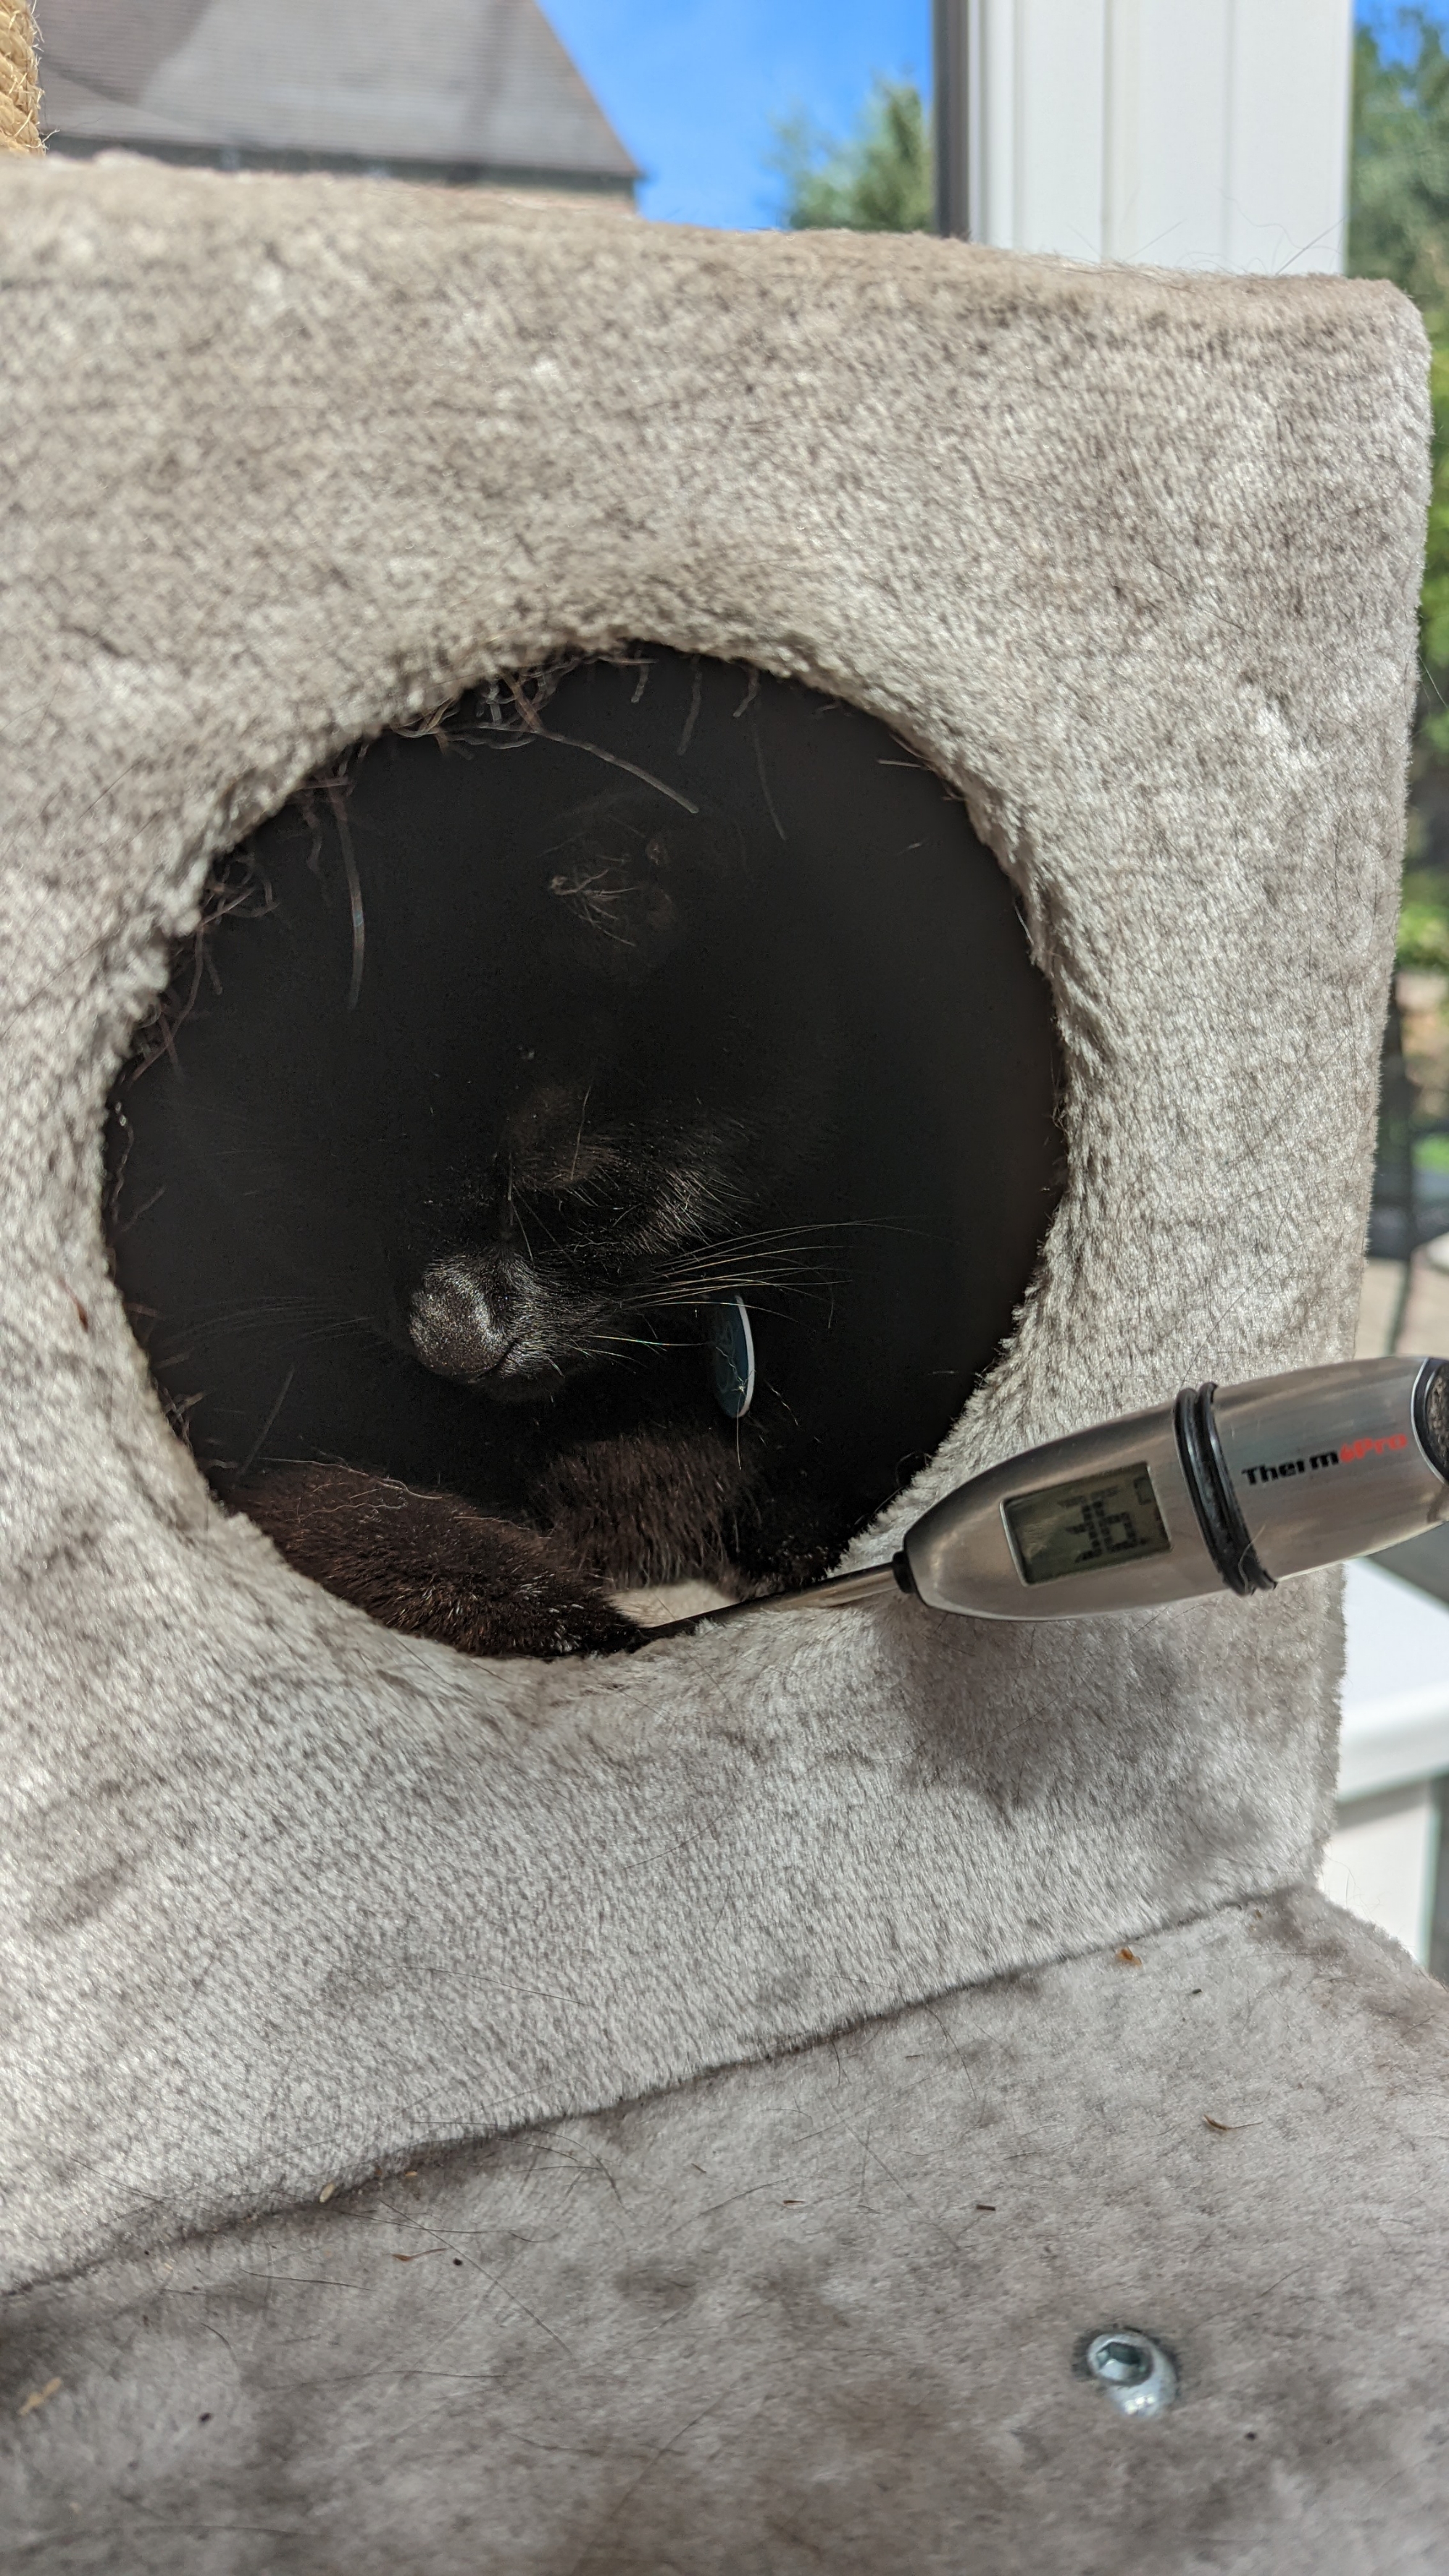 Morph the cat on his grey tower in the conservatory, inside a little hidey hole, with a meat thermometer showing the air temperature in the box as currently 36 degrees Celsius